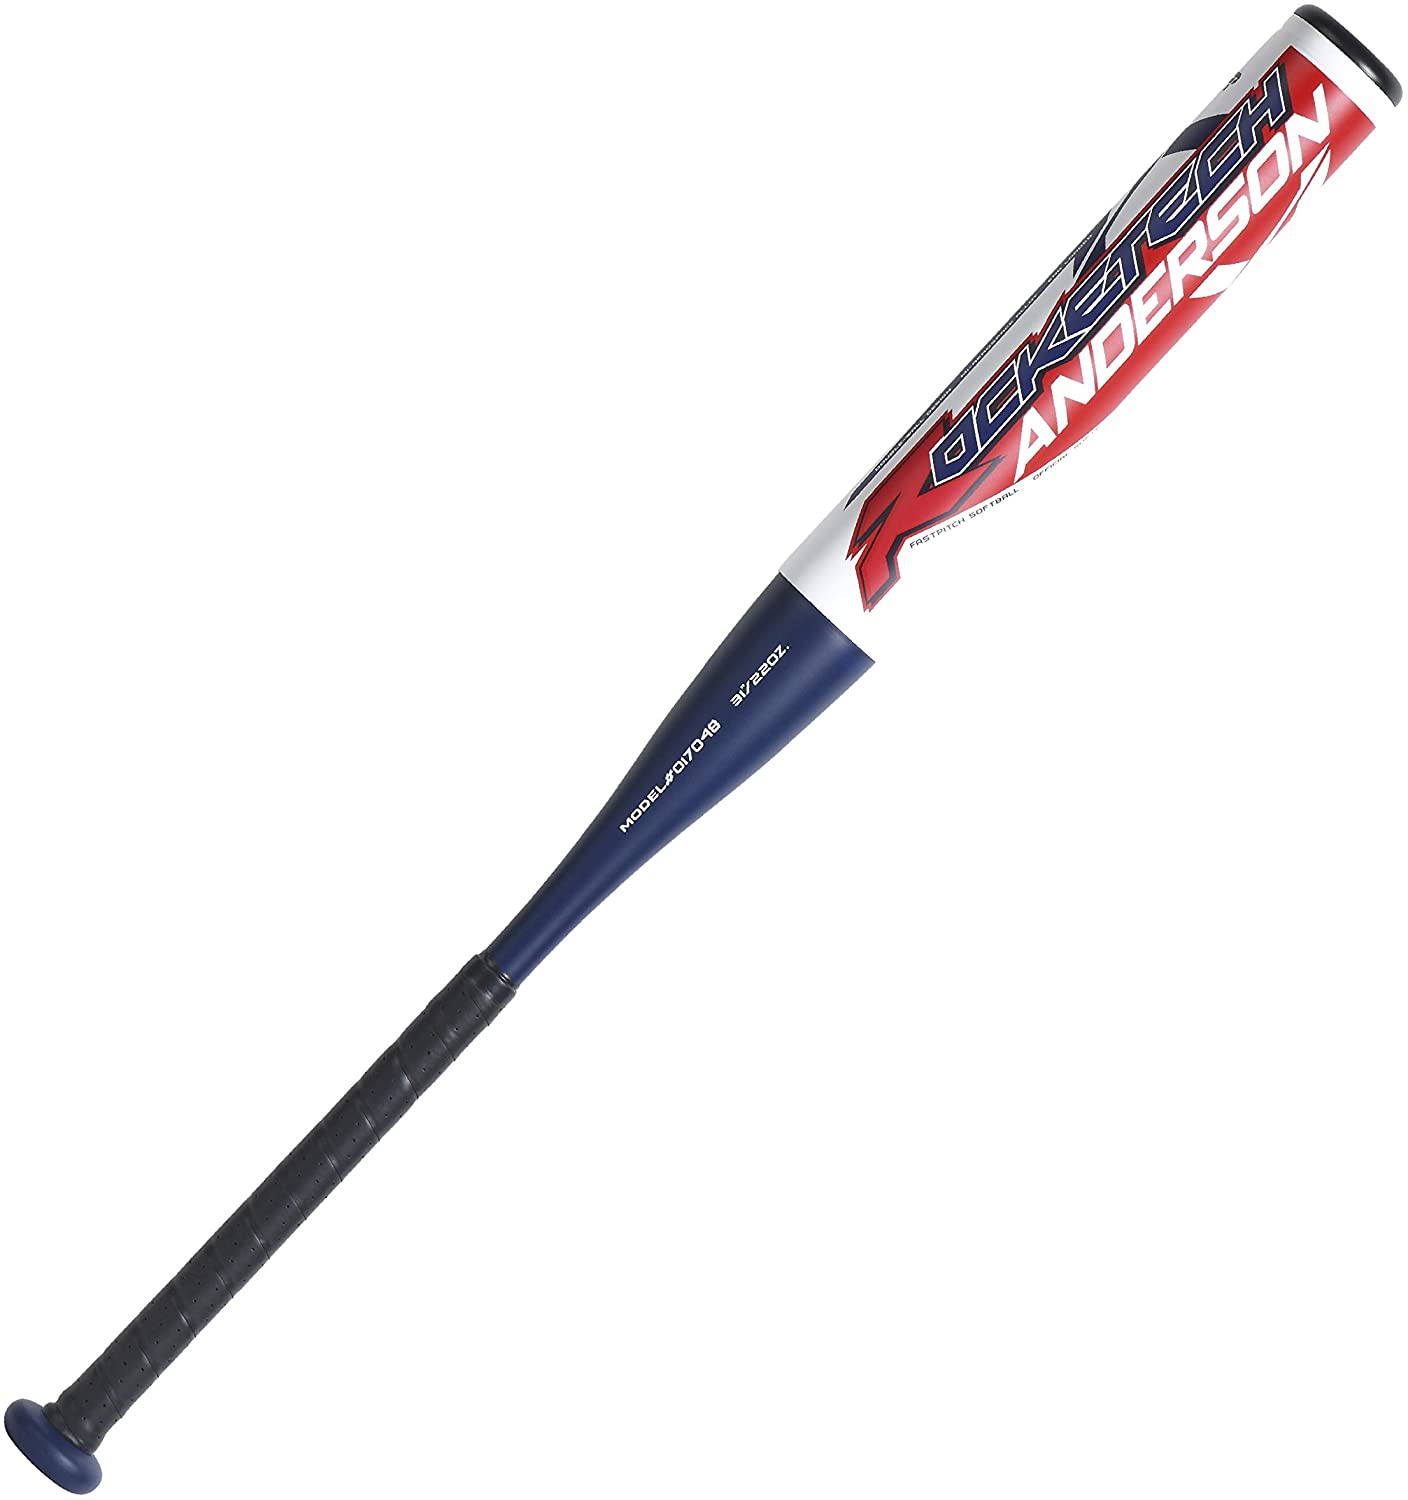 anderson-rocketech-9-aluminum-fastpitch-softball-bat-32-inch-23-oz 017048-3223 Anderson       For over 15 years the Anderson